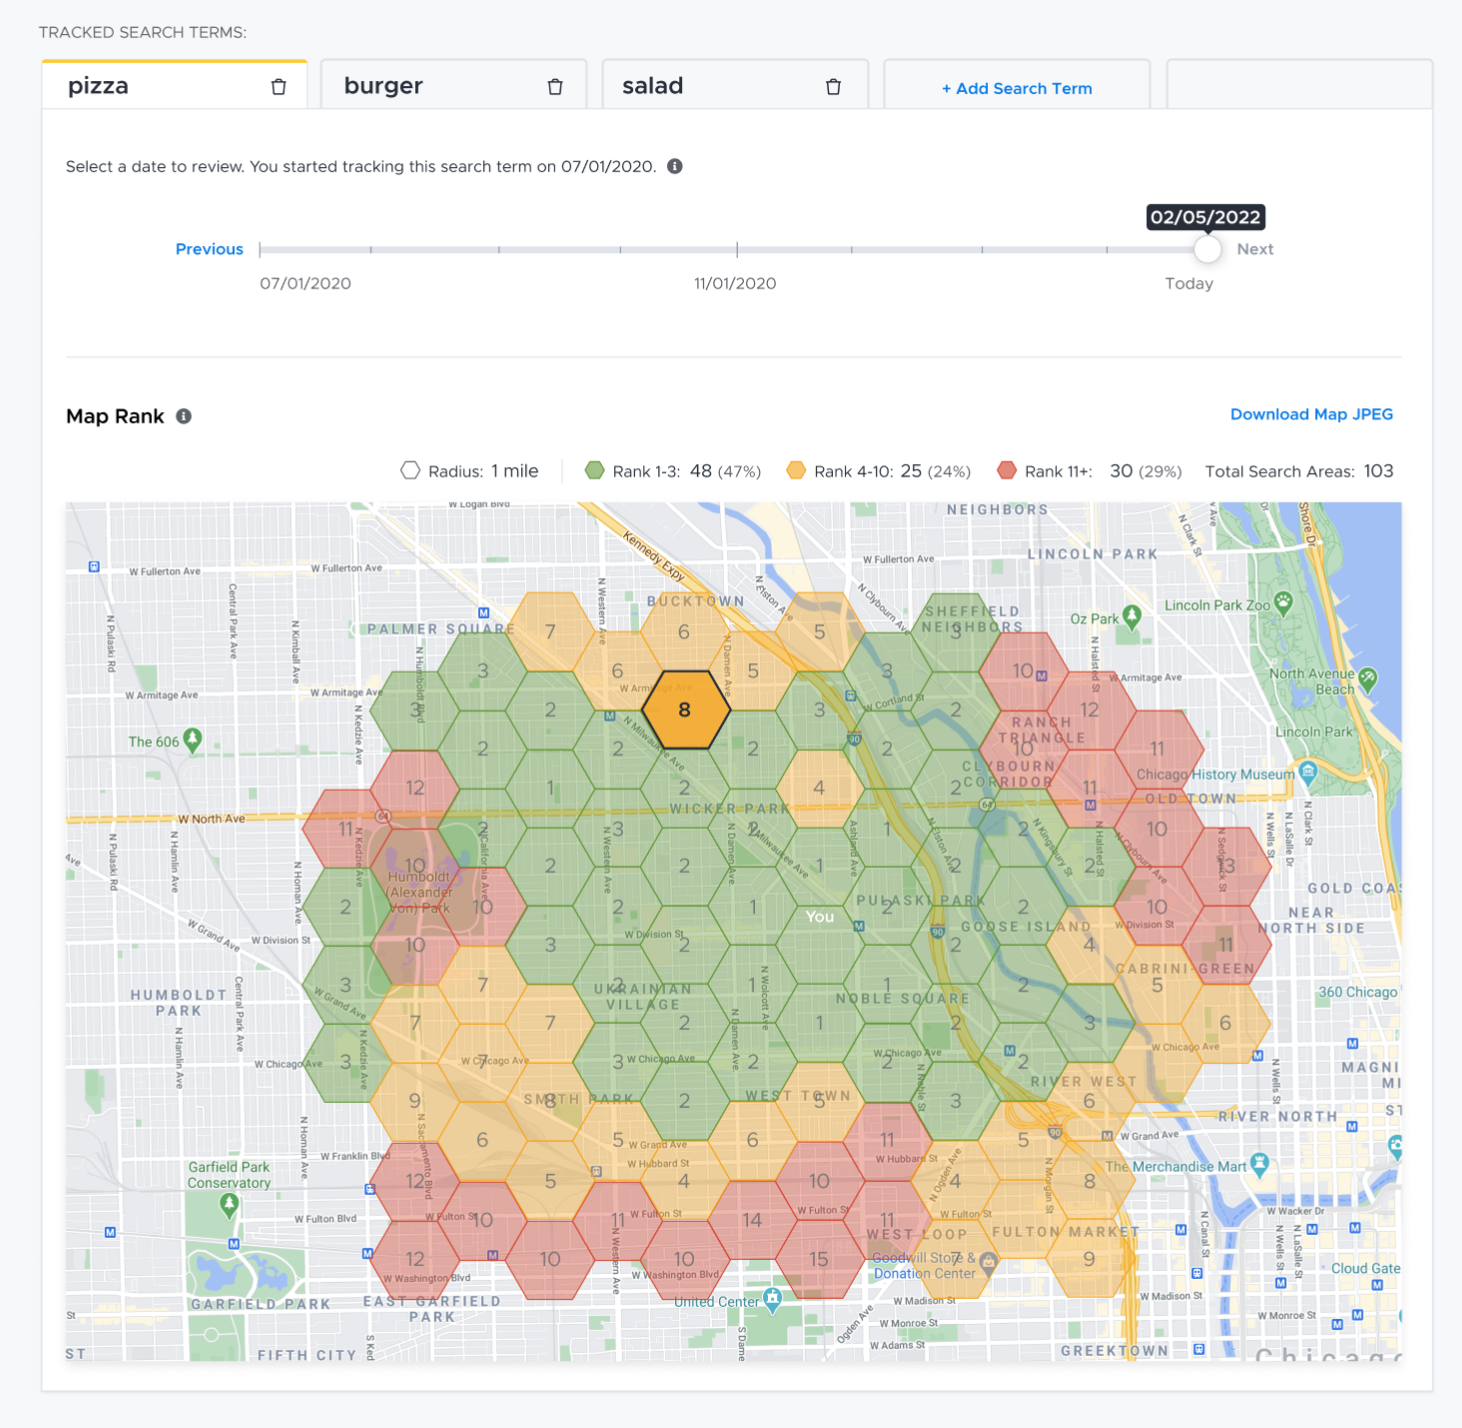 Local Search Rank: Monitor and improve your brand’s online visibility and SEO for ‘near me’ local searches to outrank your competition and generate more revenue.